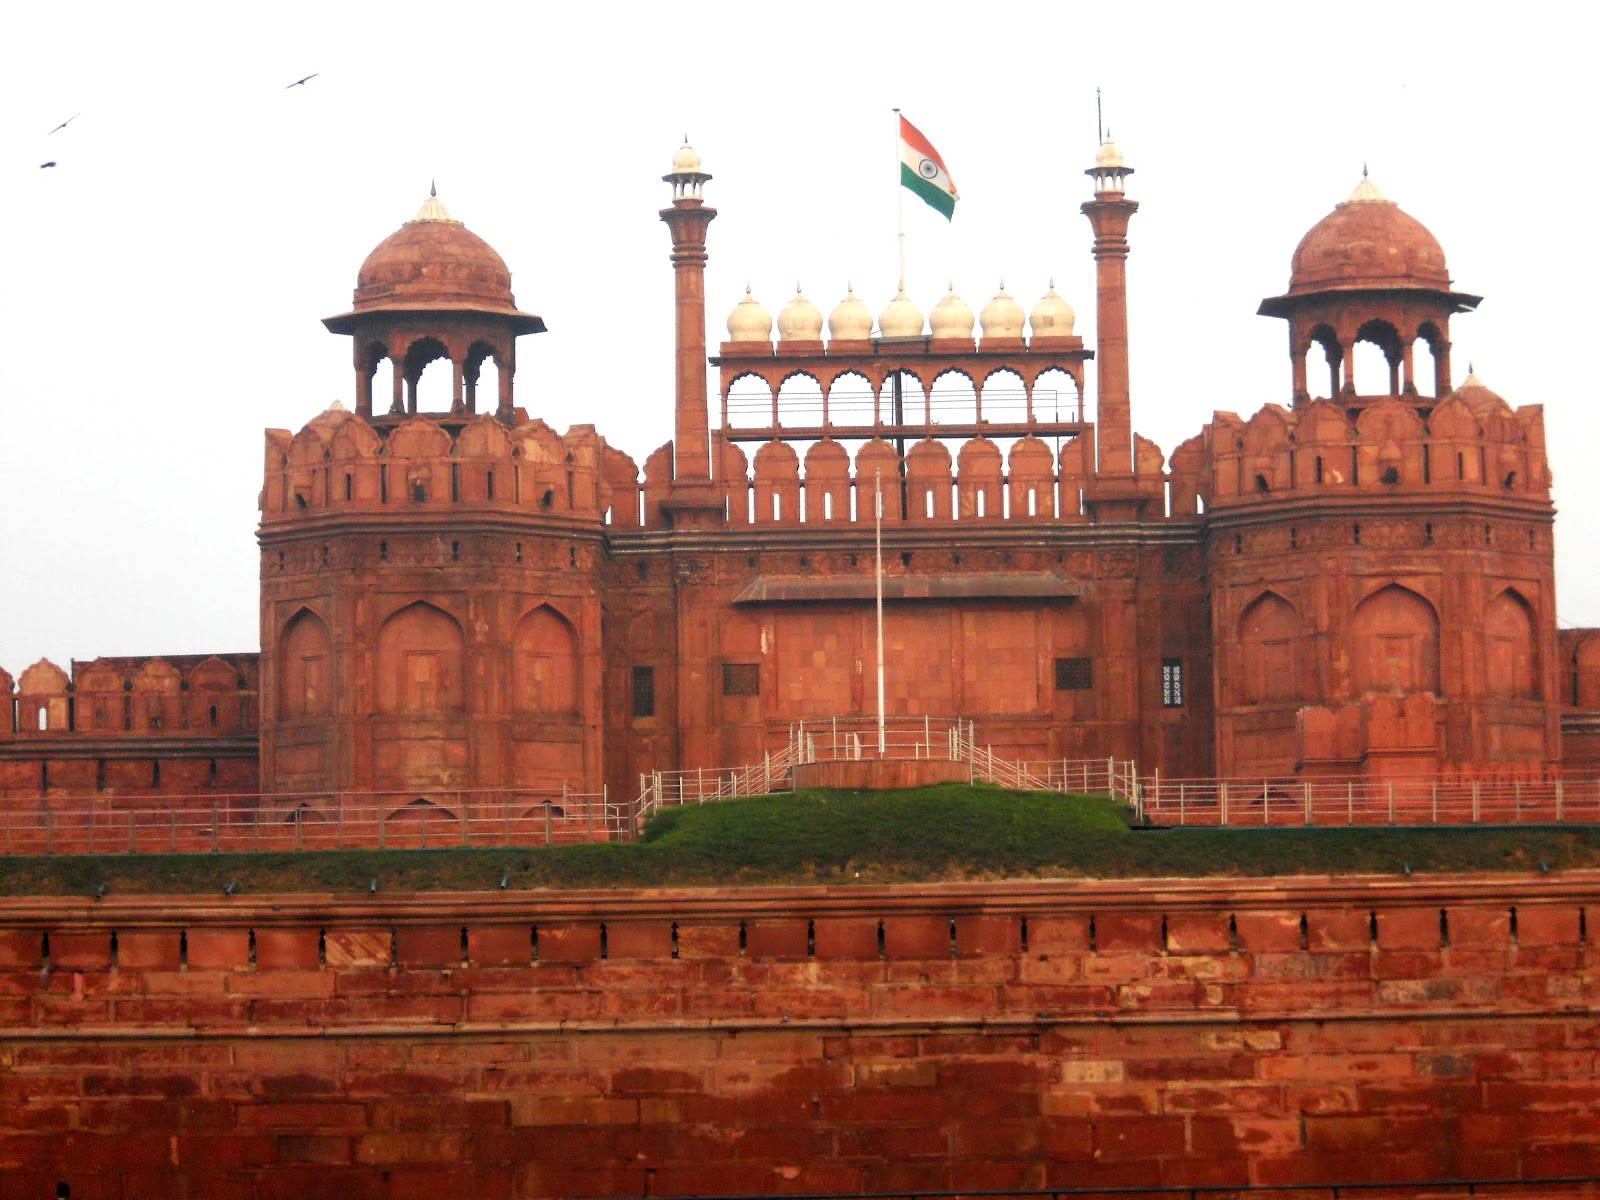 Fashion & Travel Photography: Red Fort - New Delhi (India)